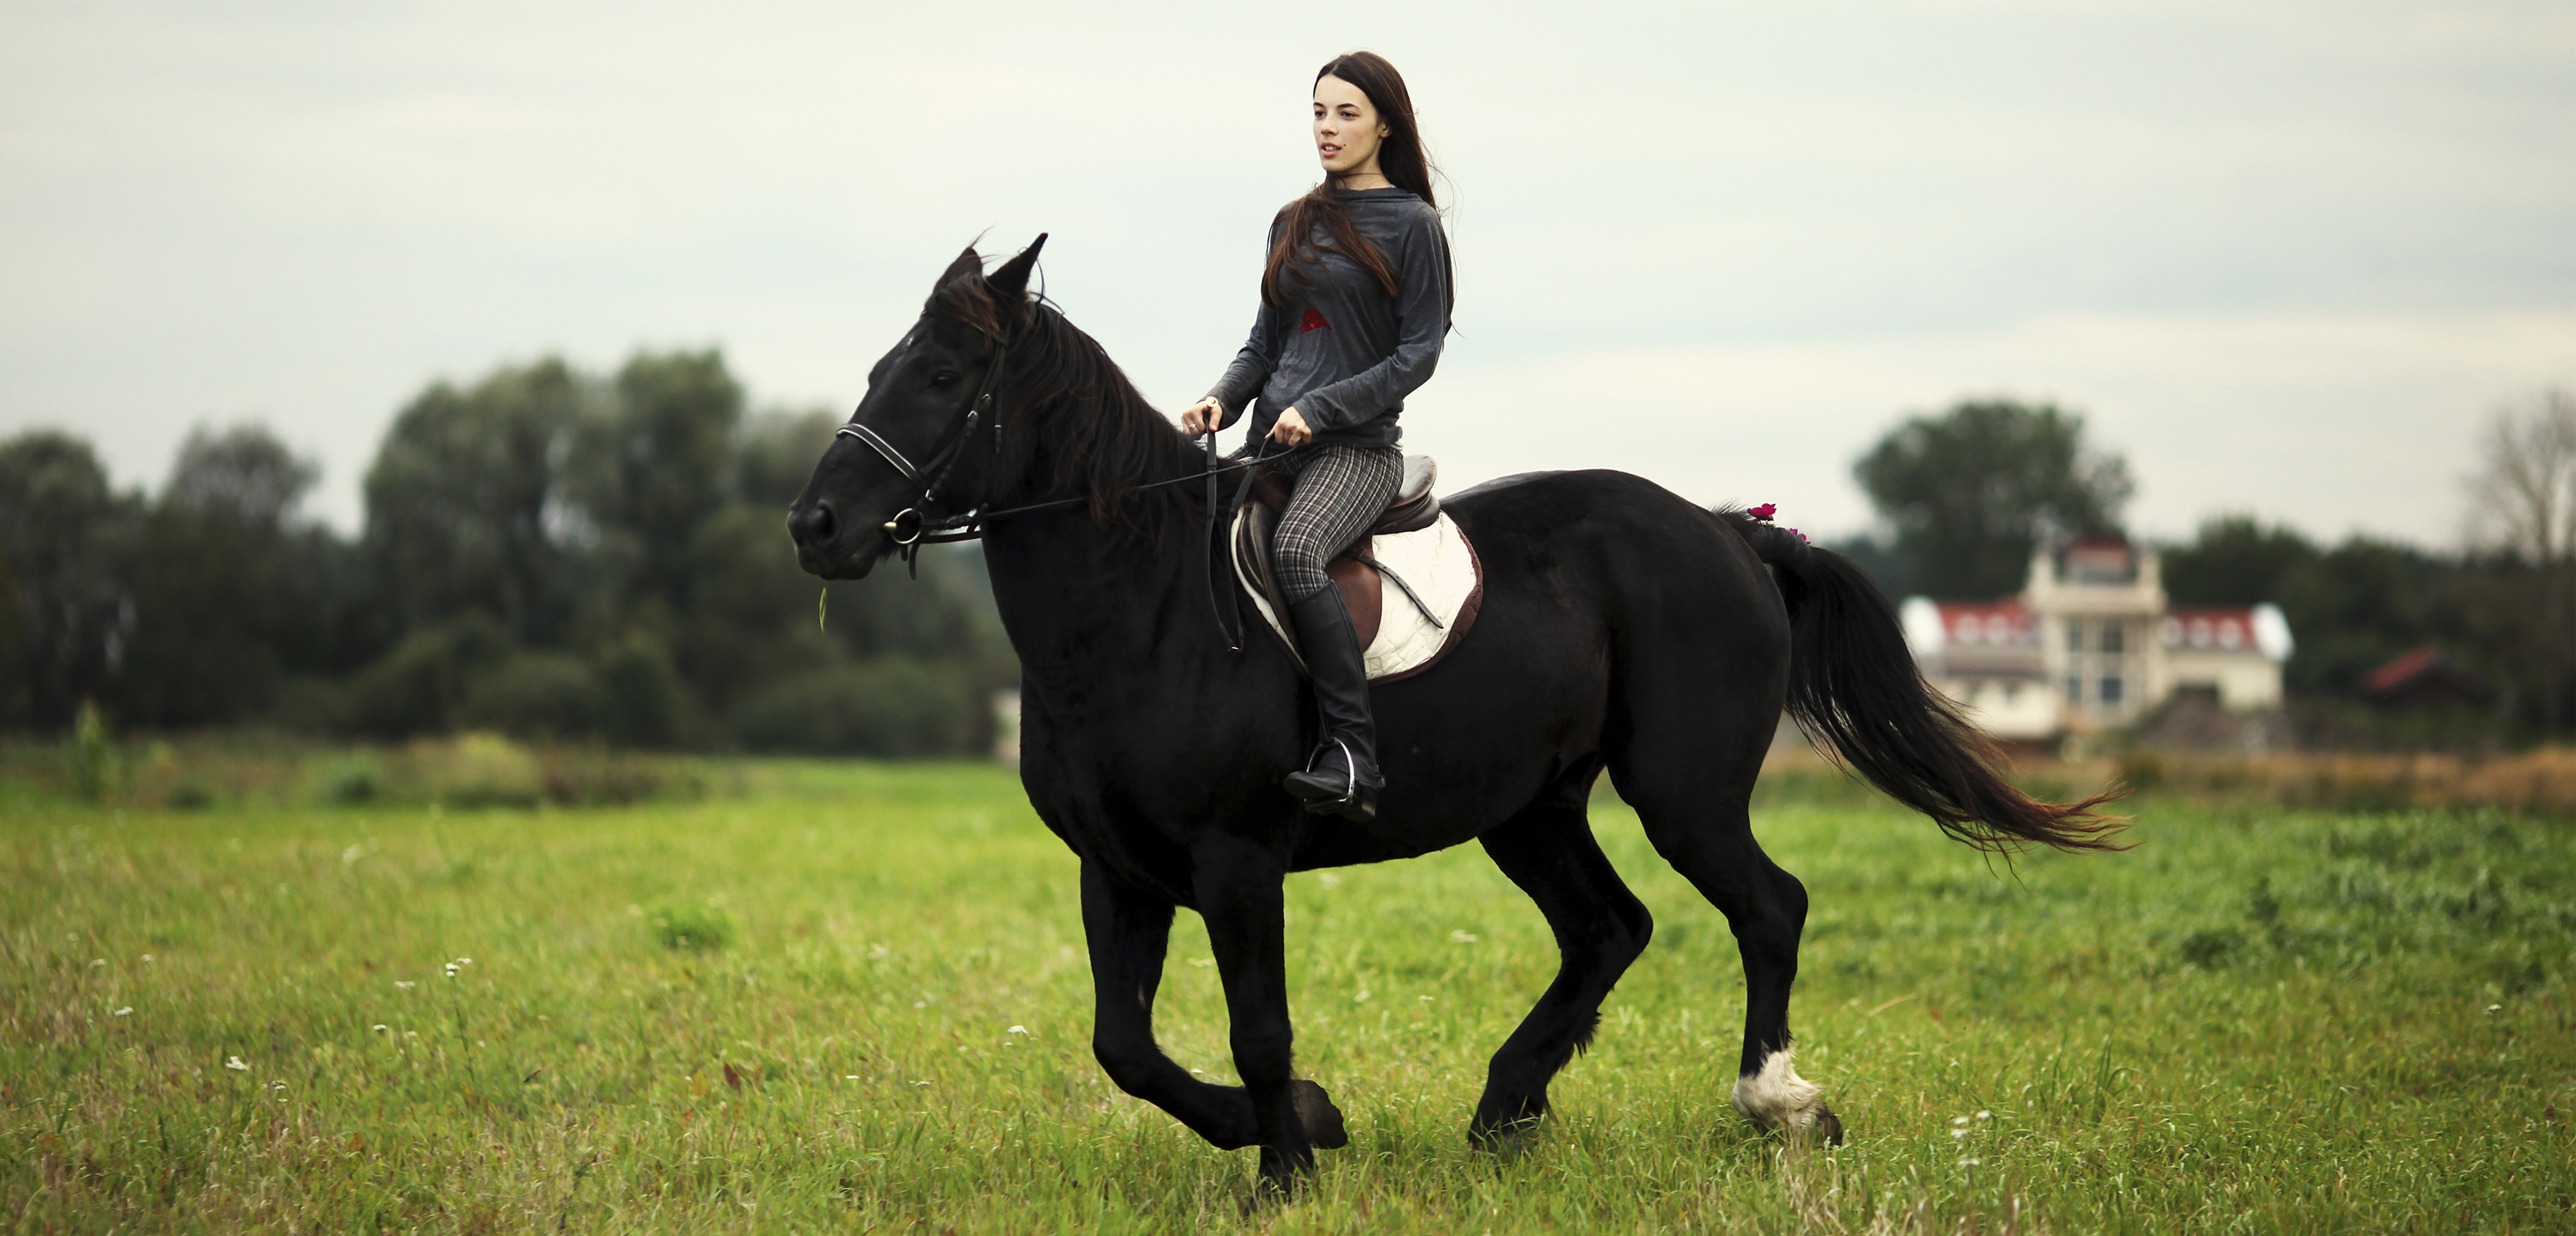 Horse and rider wallpapers and images - wallpapers, pictures, photos